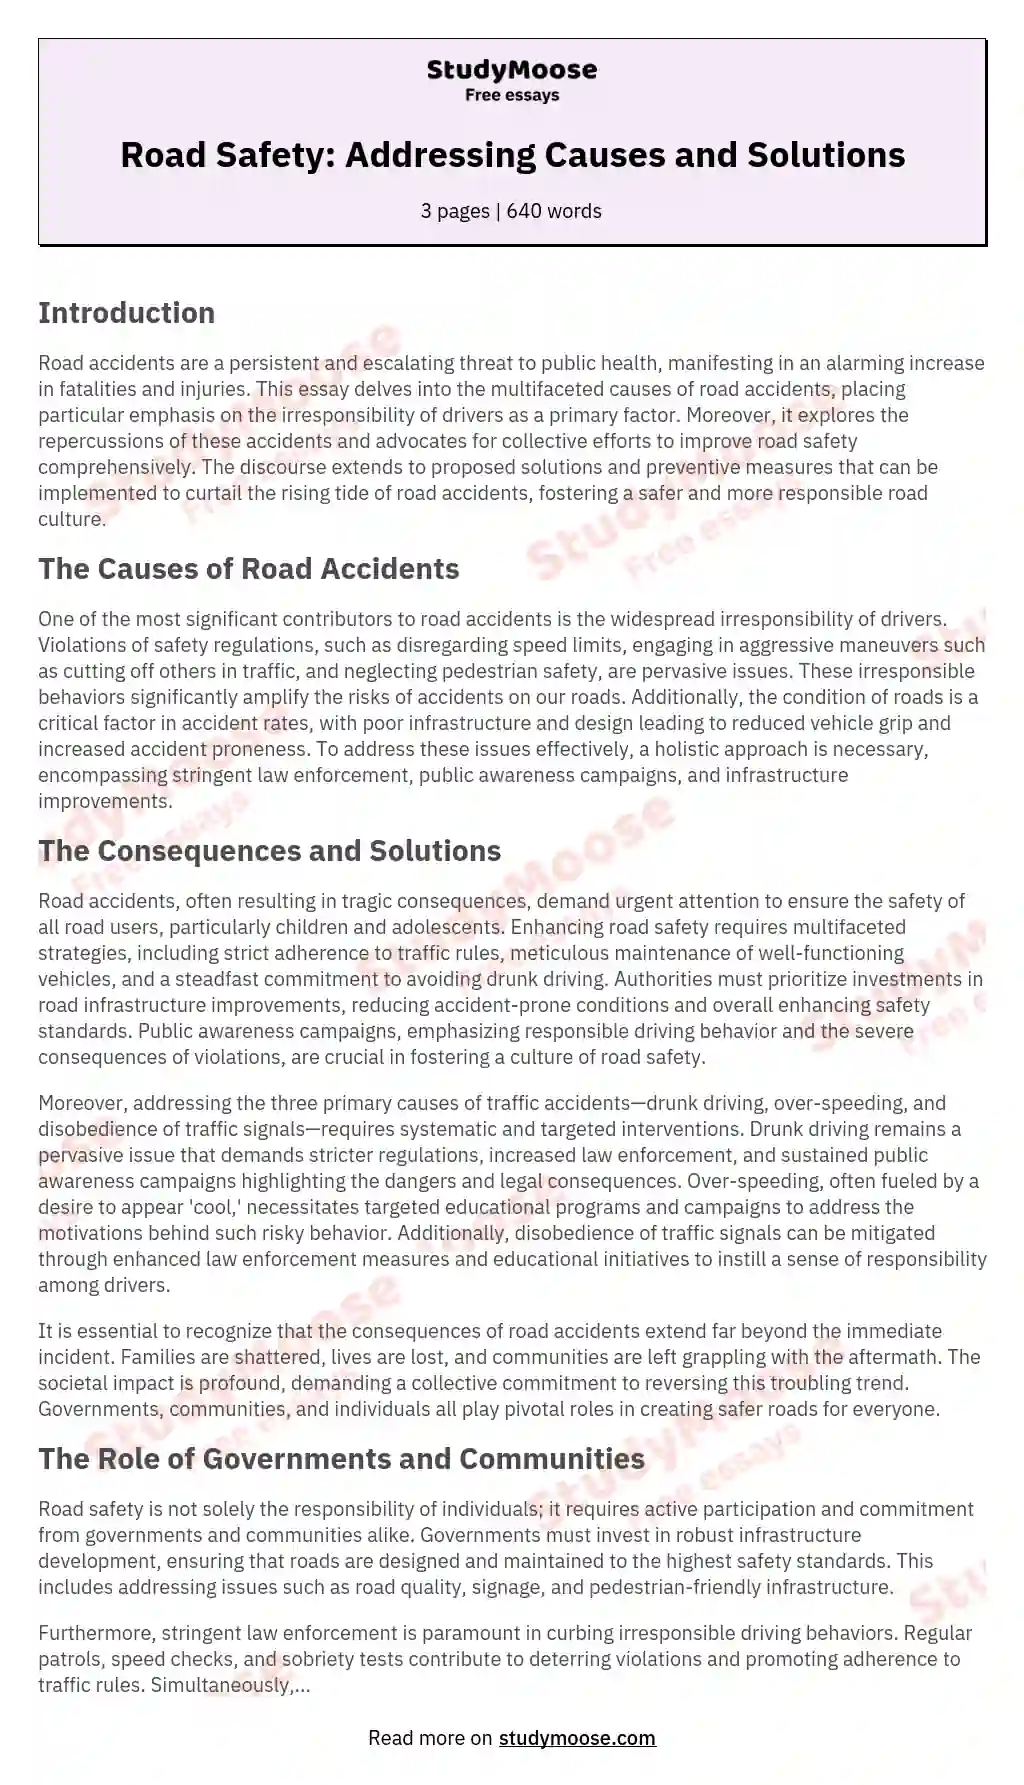 Road Safety: Addressing Causes and Solutions essay